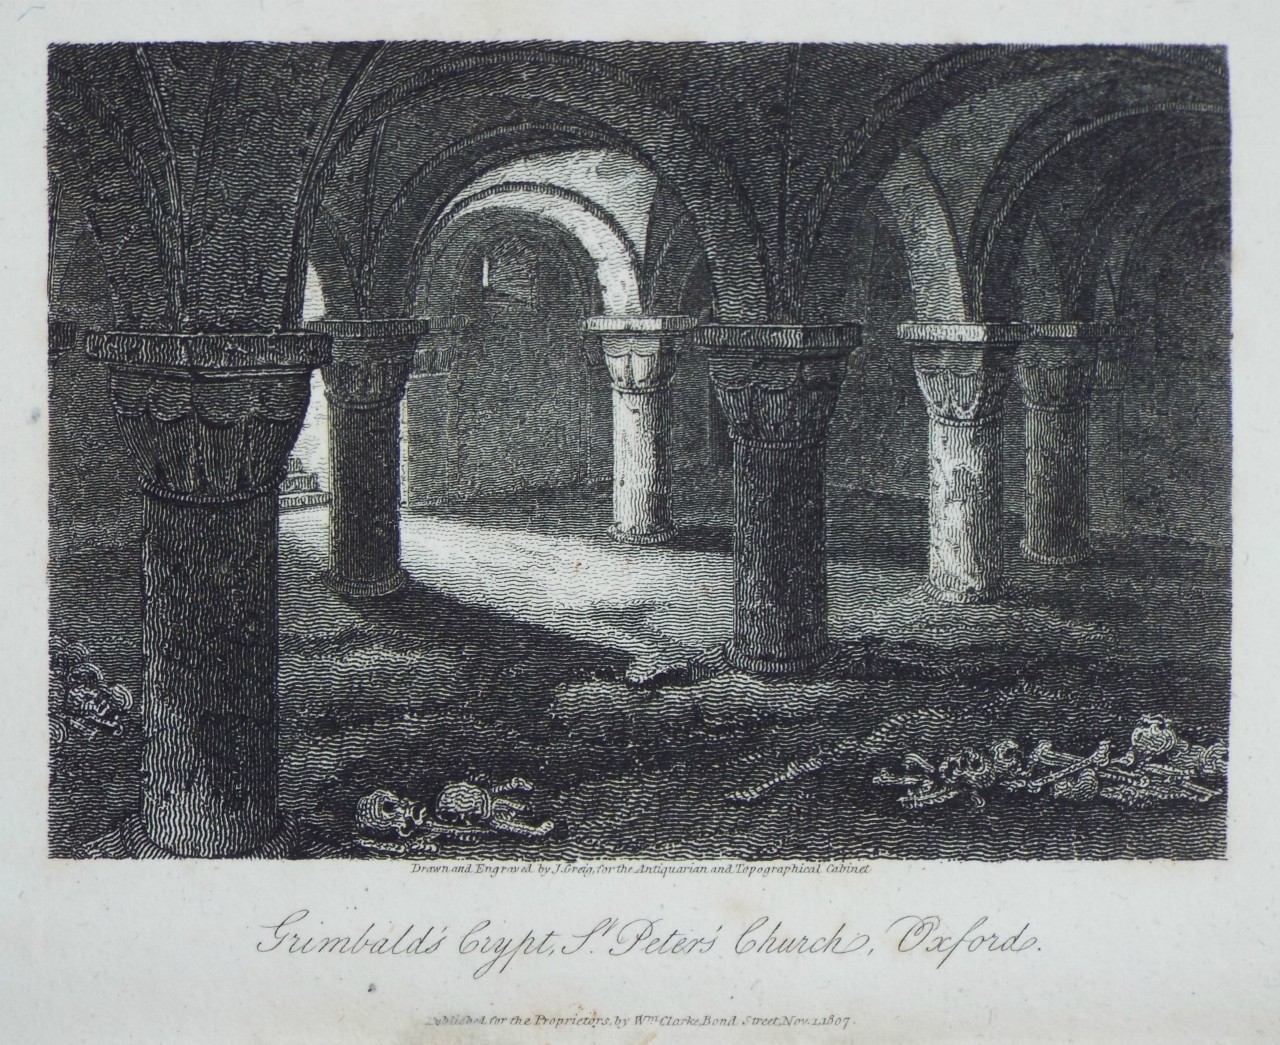 Print - Gumbald's Crypt, St. Peter's Church, Oxford. - Greig